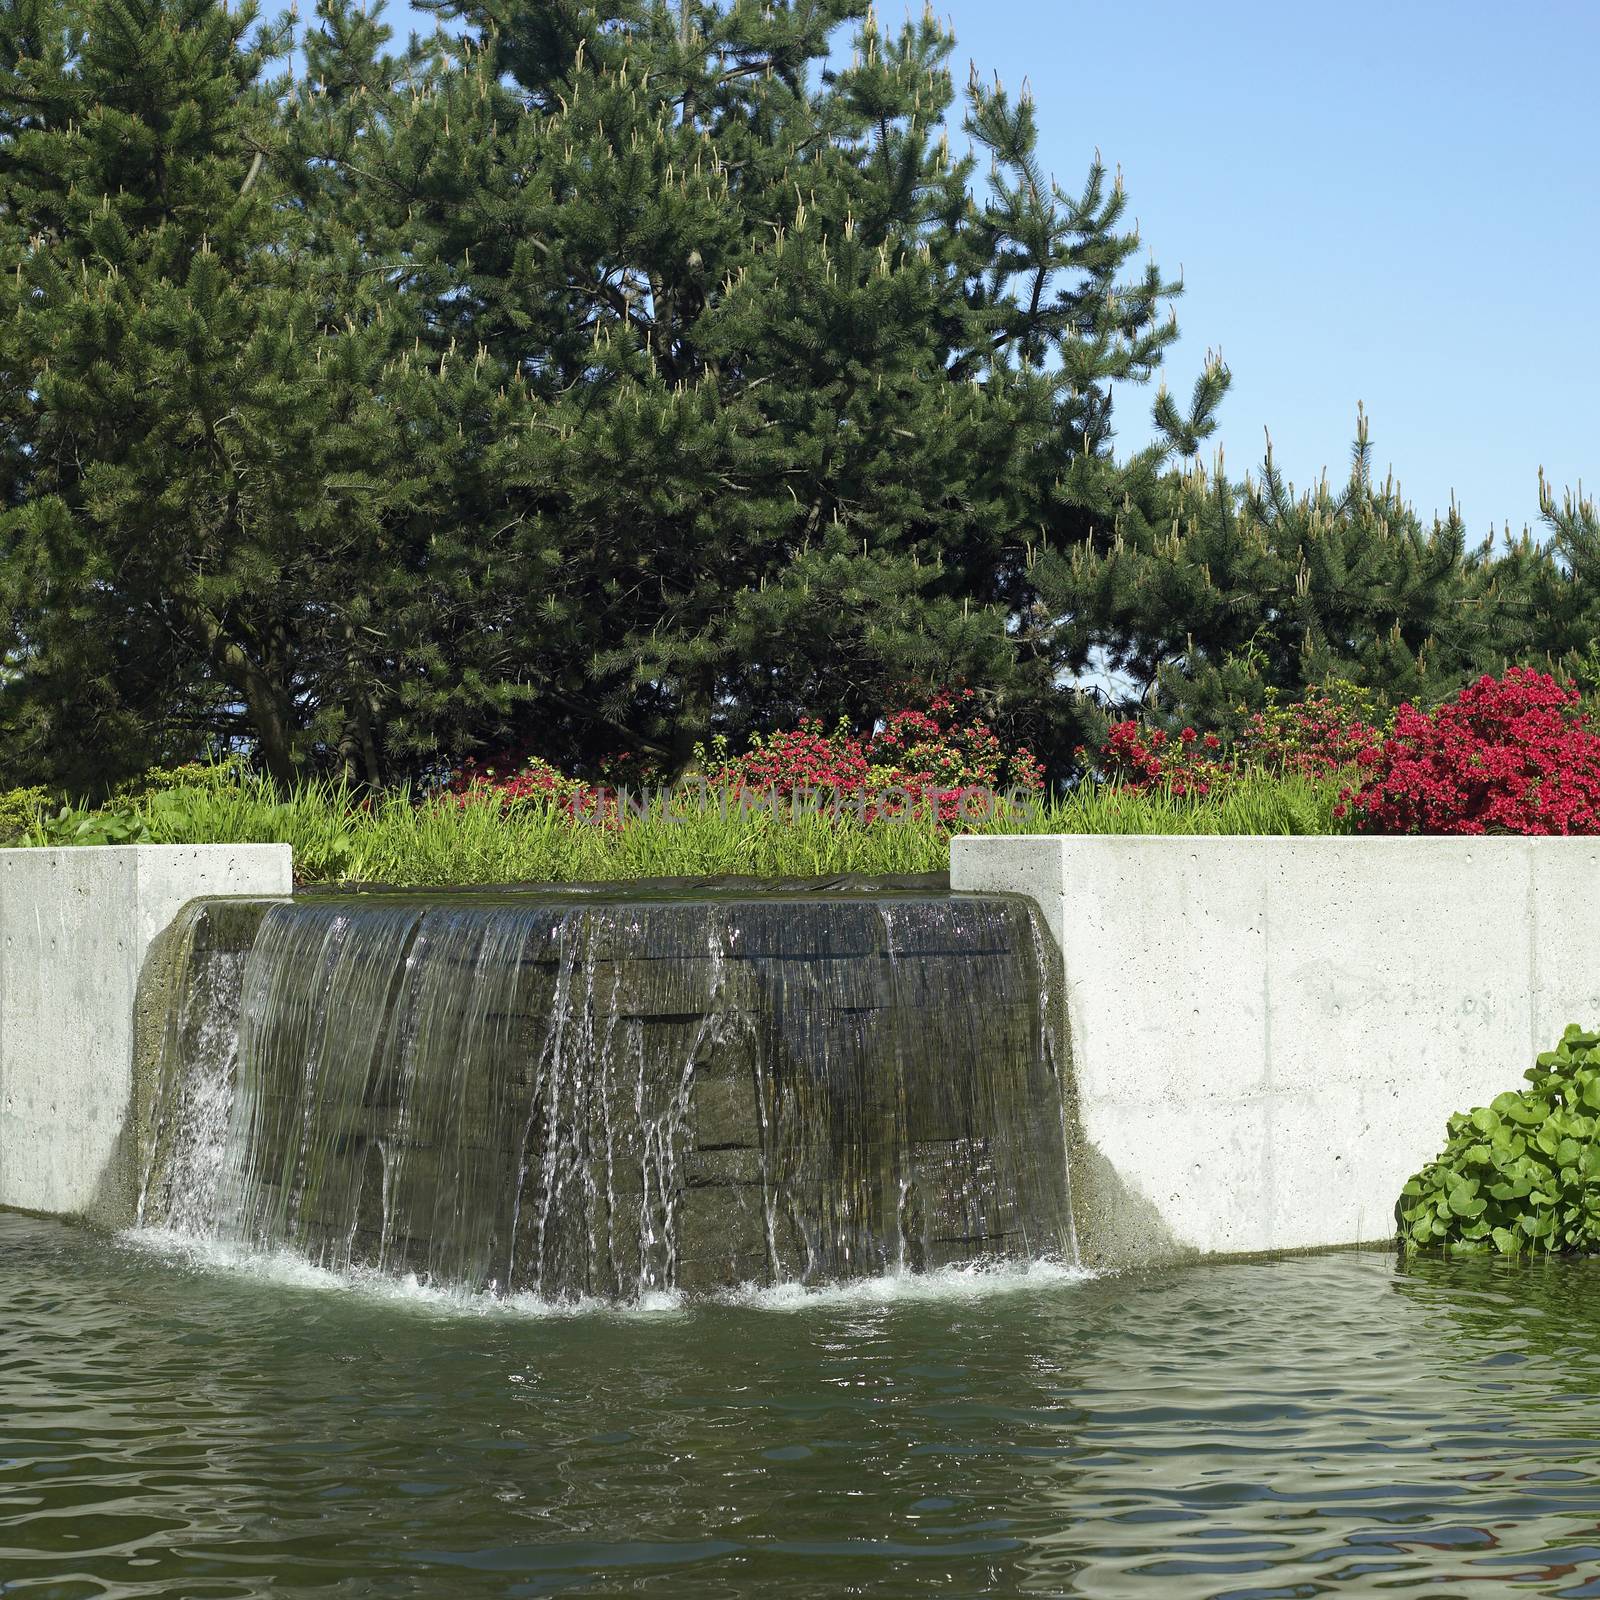 Water feature flows over brick wall in an urban park